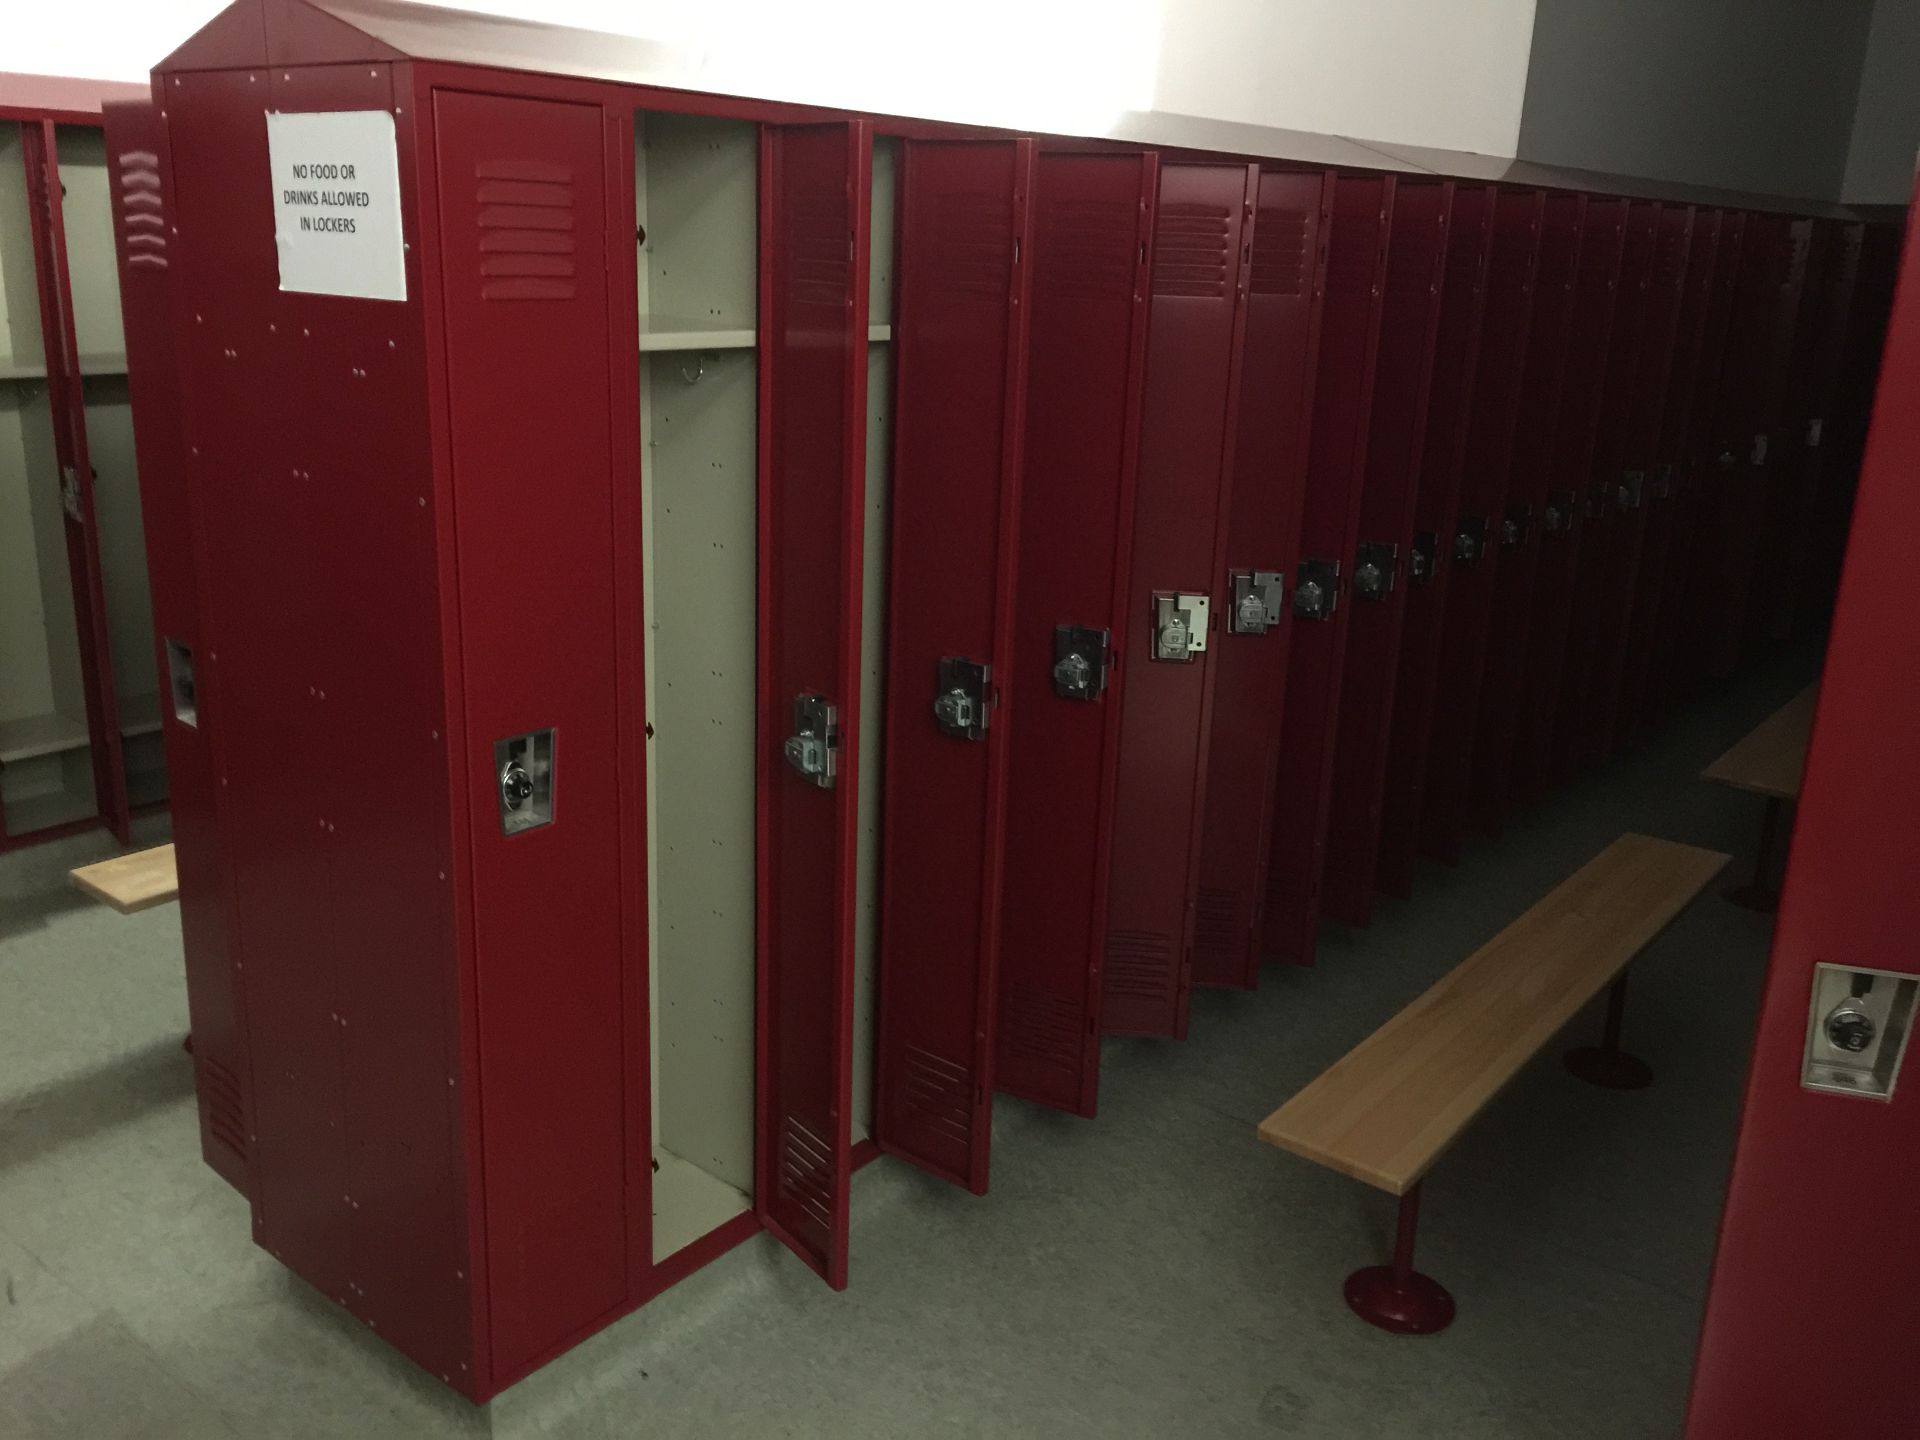 (201) men and women's lockers, Room 4521. Located in Marion, Ohio Rigging Fee: $600 - Image 10 of 12